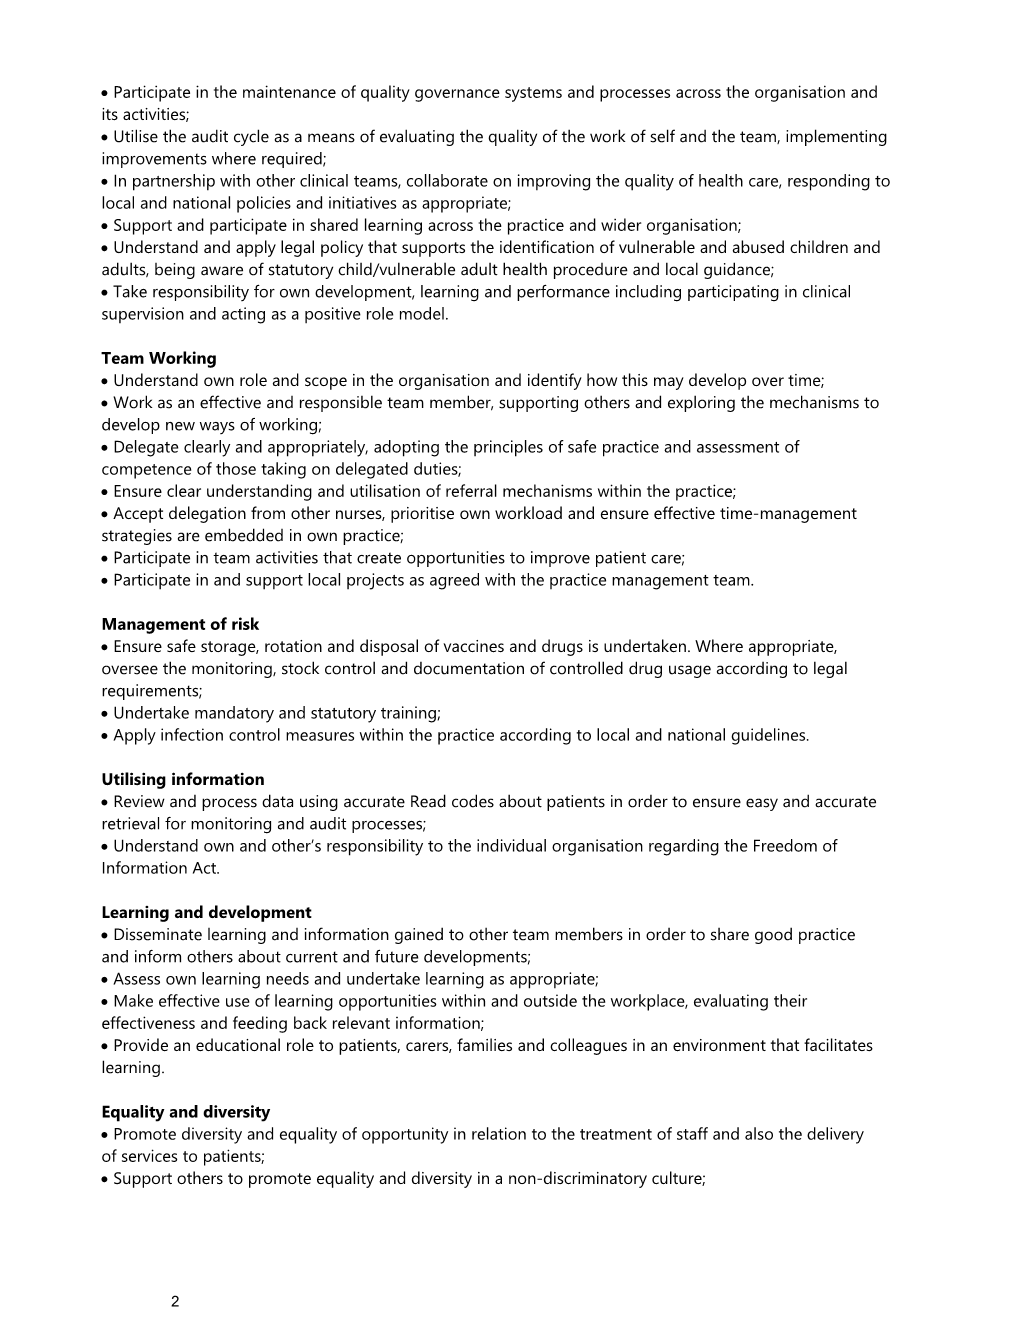 Job Description for the Post of Practice Nurse - Band 5 Or 6 (Equivalent)